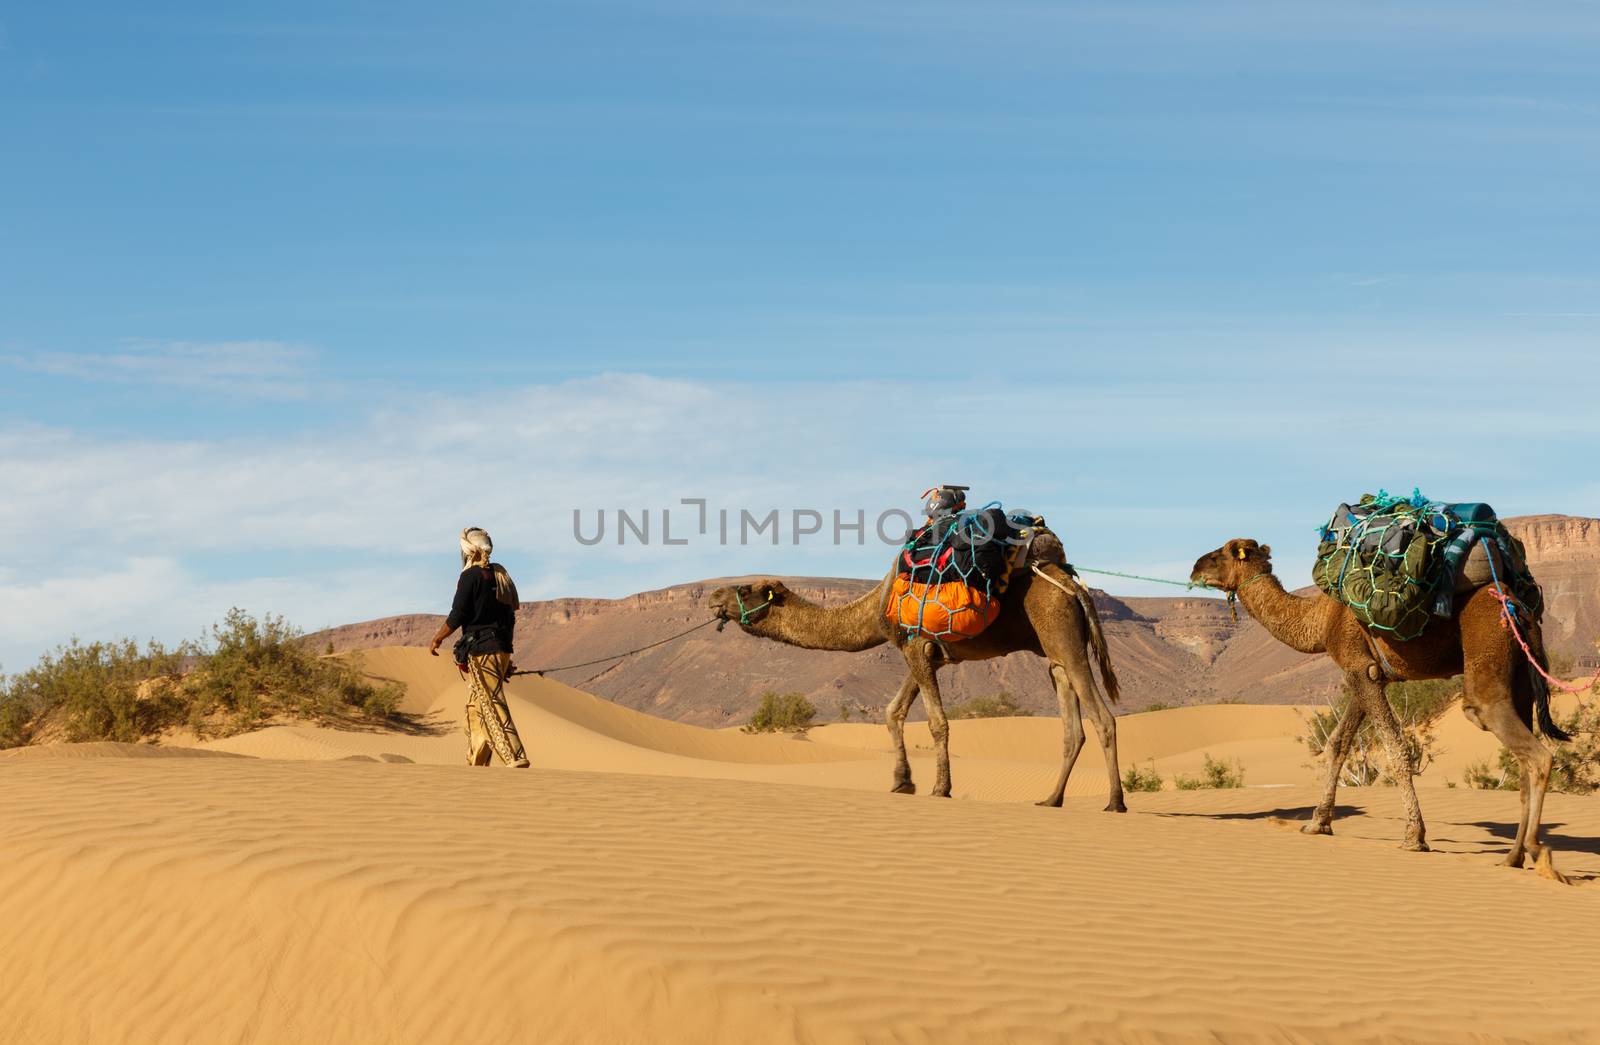 bereber leads camels through the desert, Morocco by Mieszko9